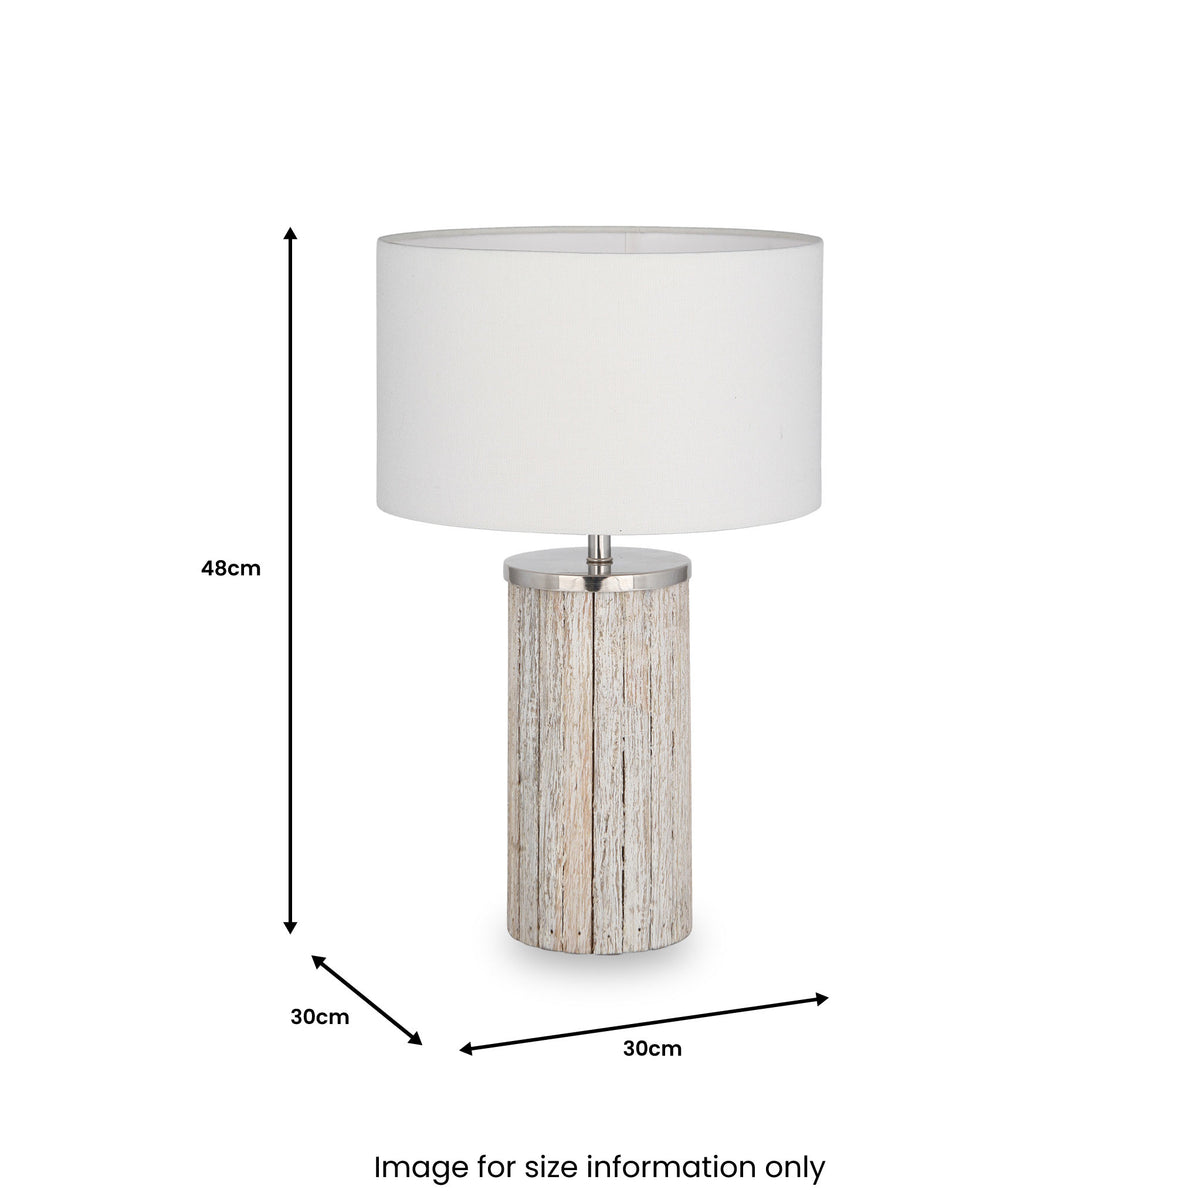 Haley White Wash Wood Column Table Lamp from Roseland Furniture